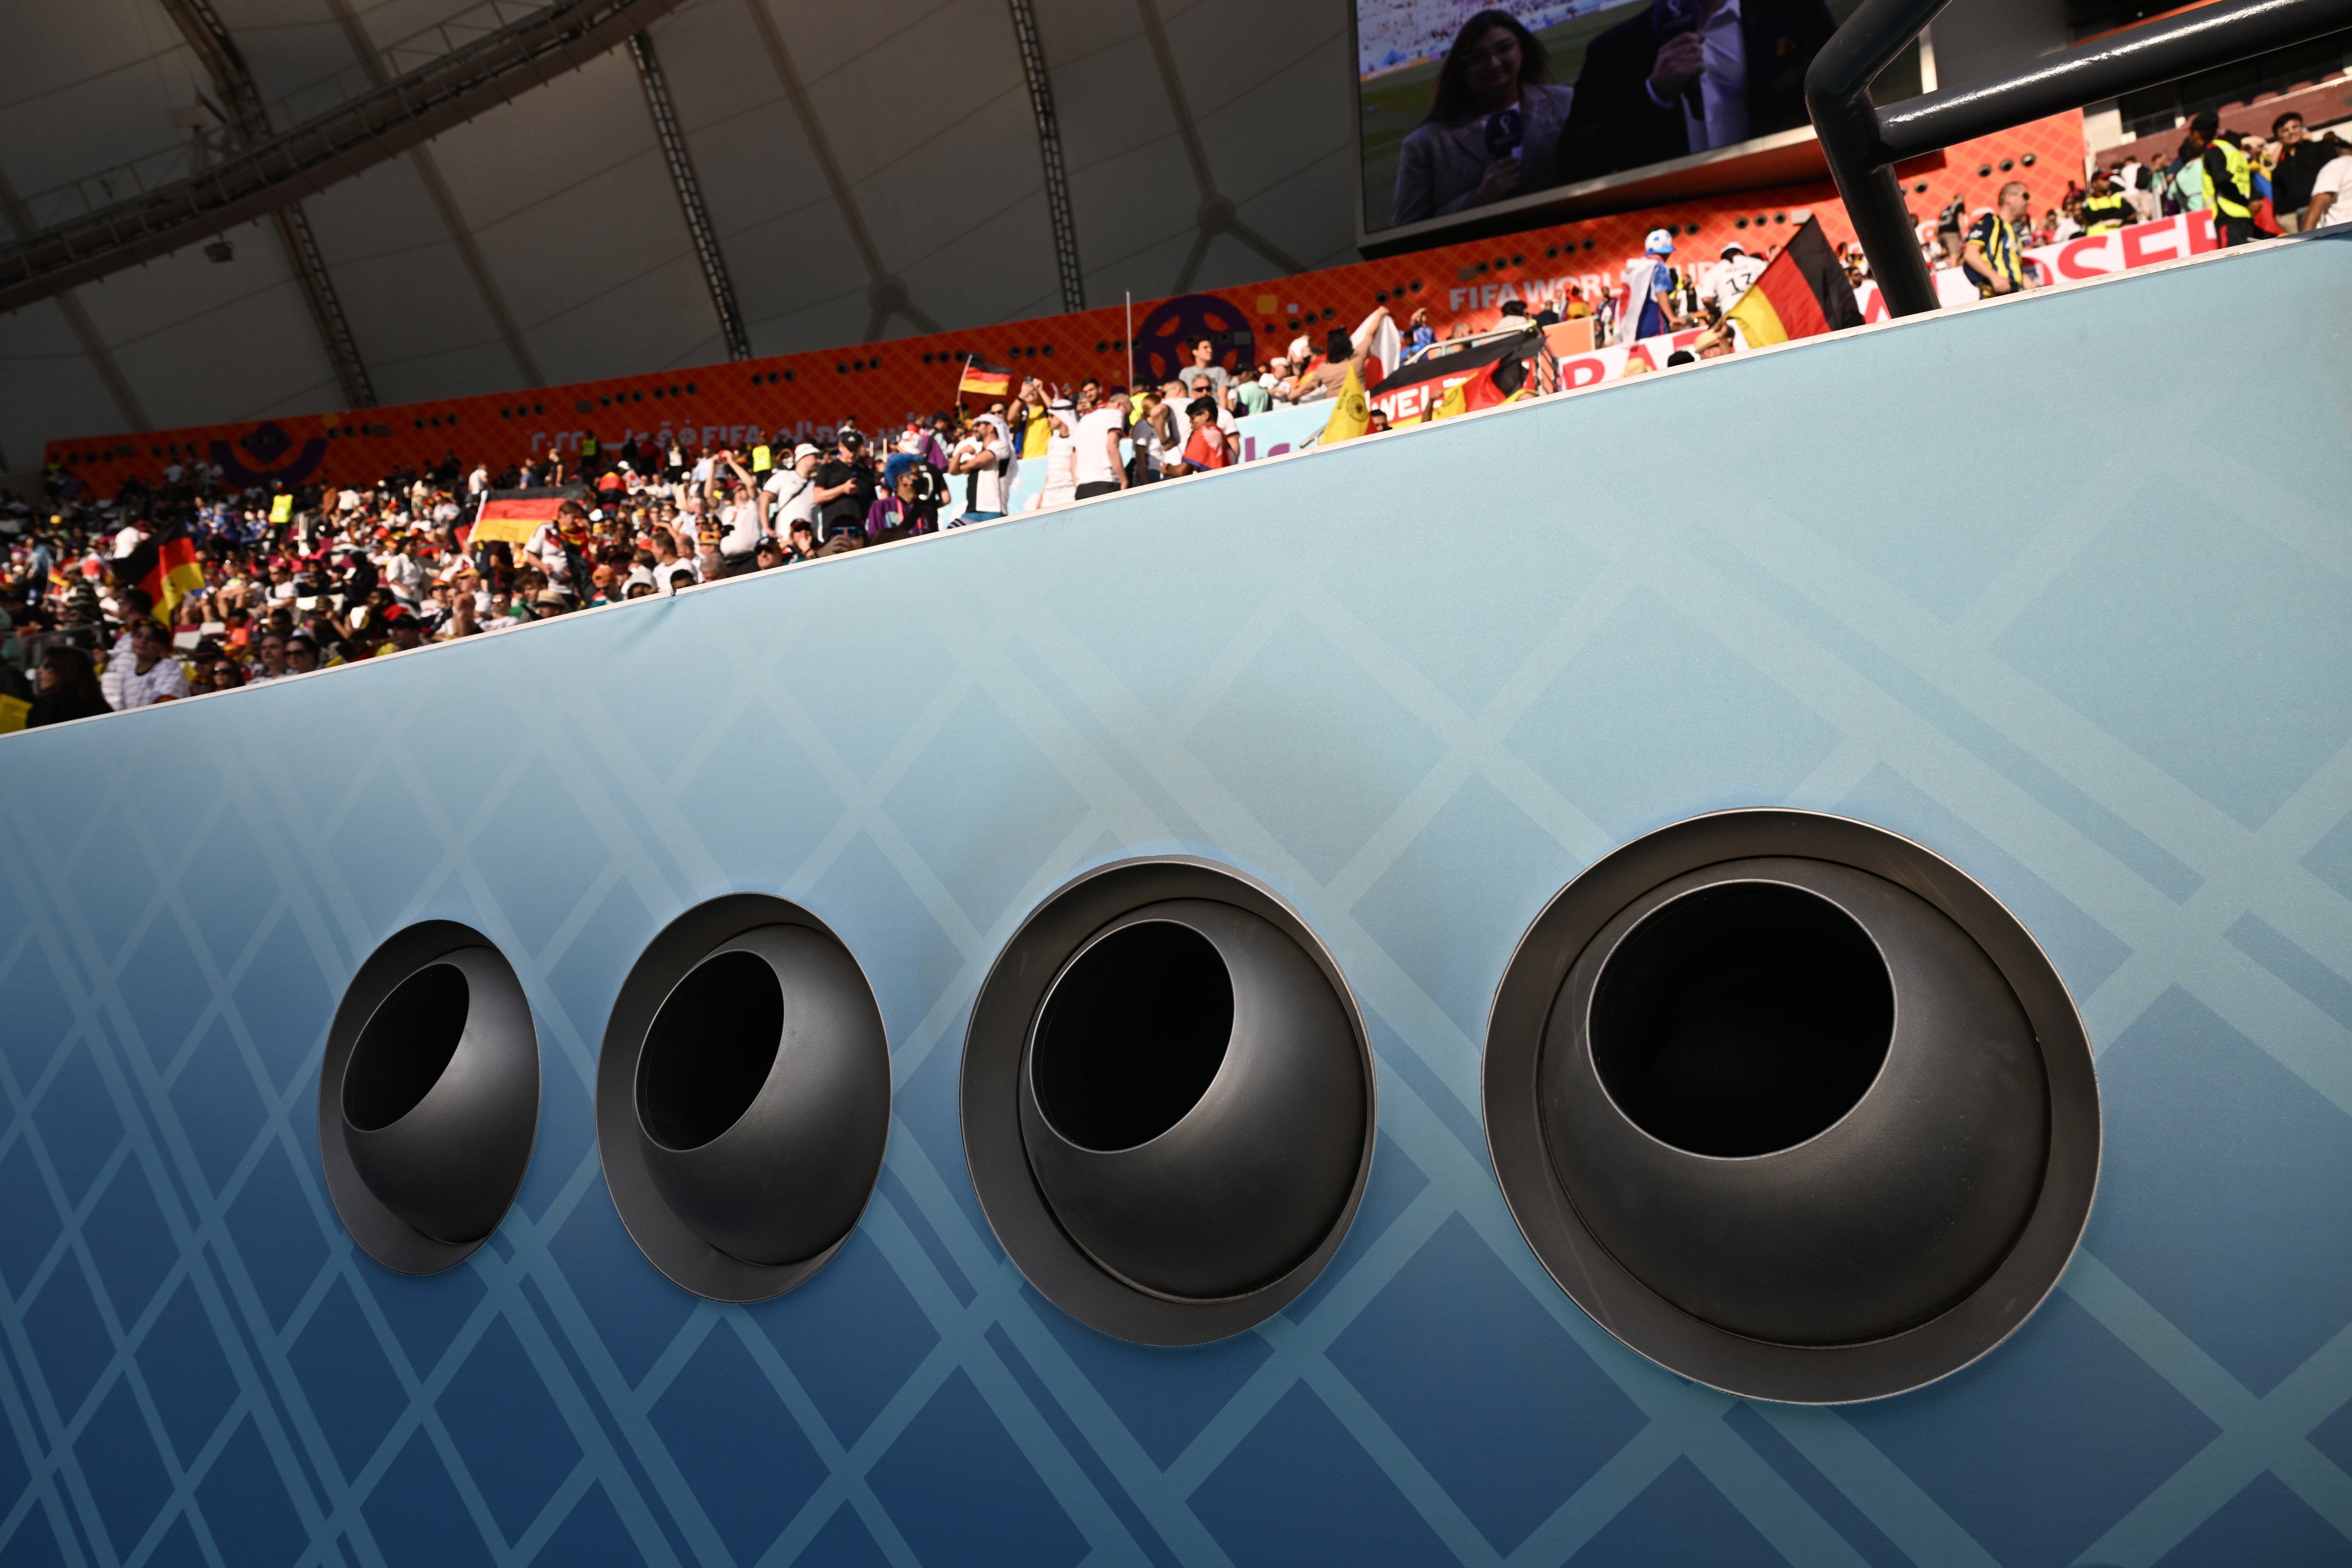 Air conditioning vents, which ensure a moderate temperature in the open-air arena, are seen at Chalifa International Stadium in Qatar during the Germany vs. Japan game on Nov. 23, 2022 (Federico Gambarini—picture alliance/Getty Images)